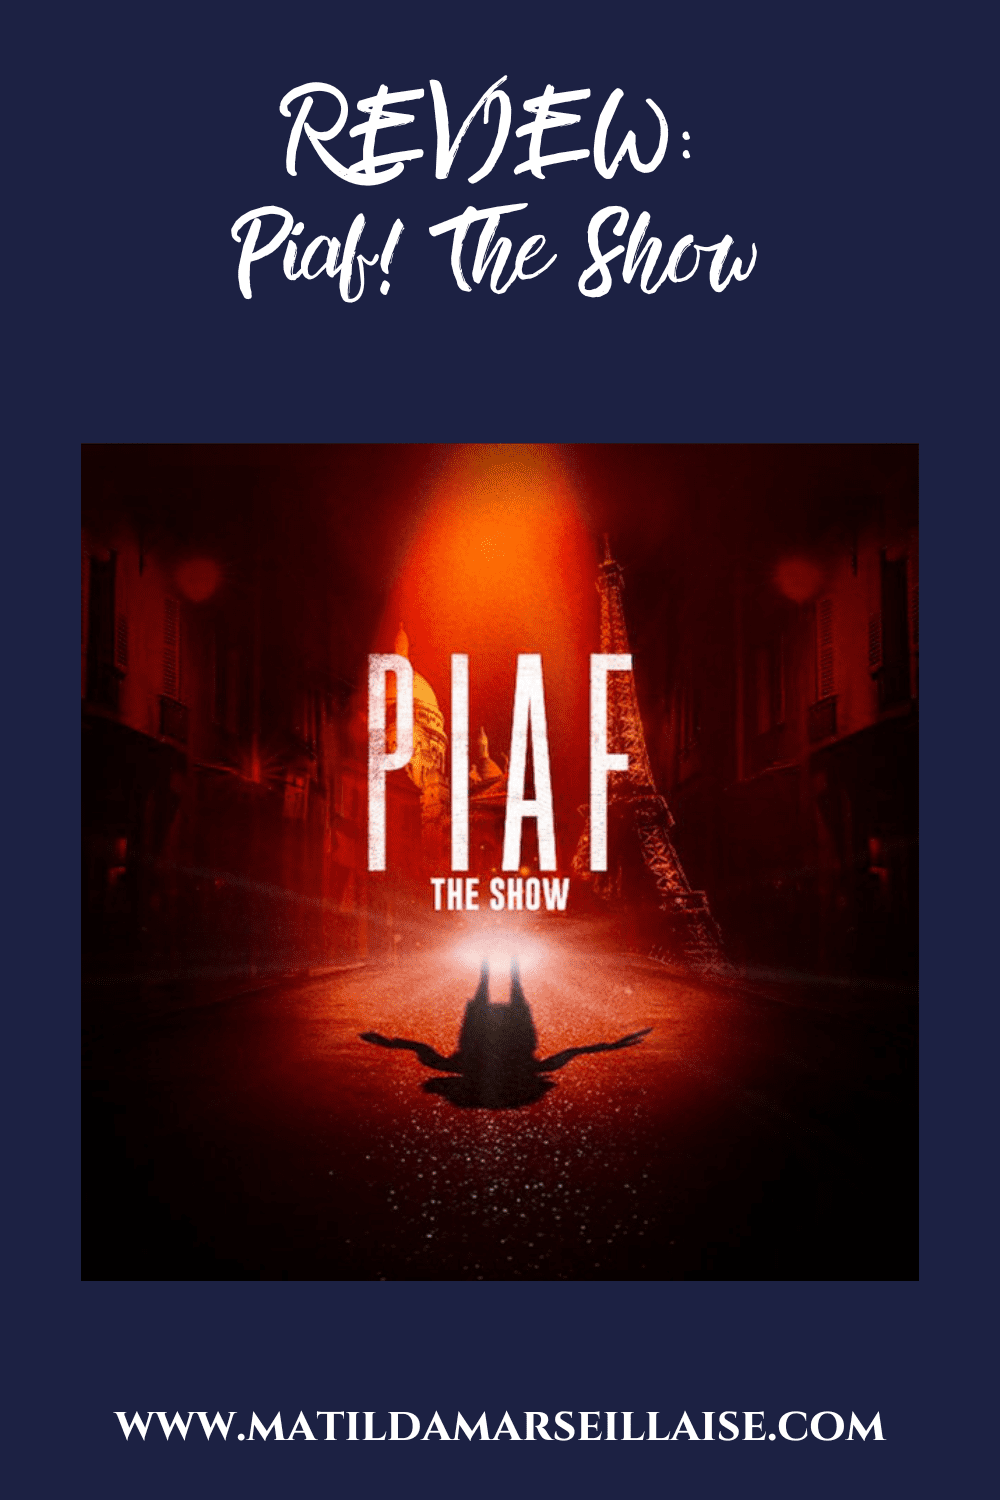 Piaf! The Show is simply Piaf-ection